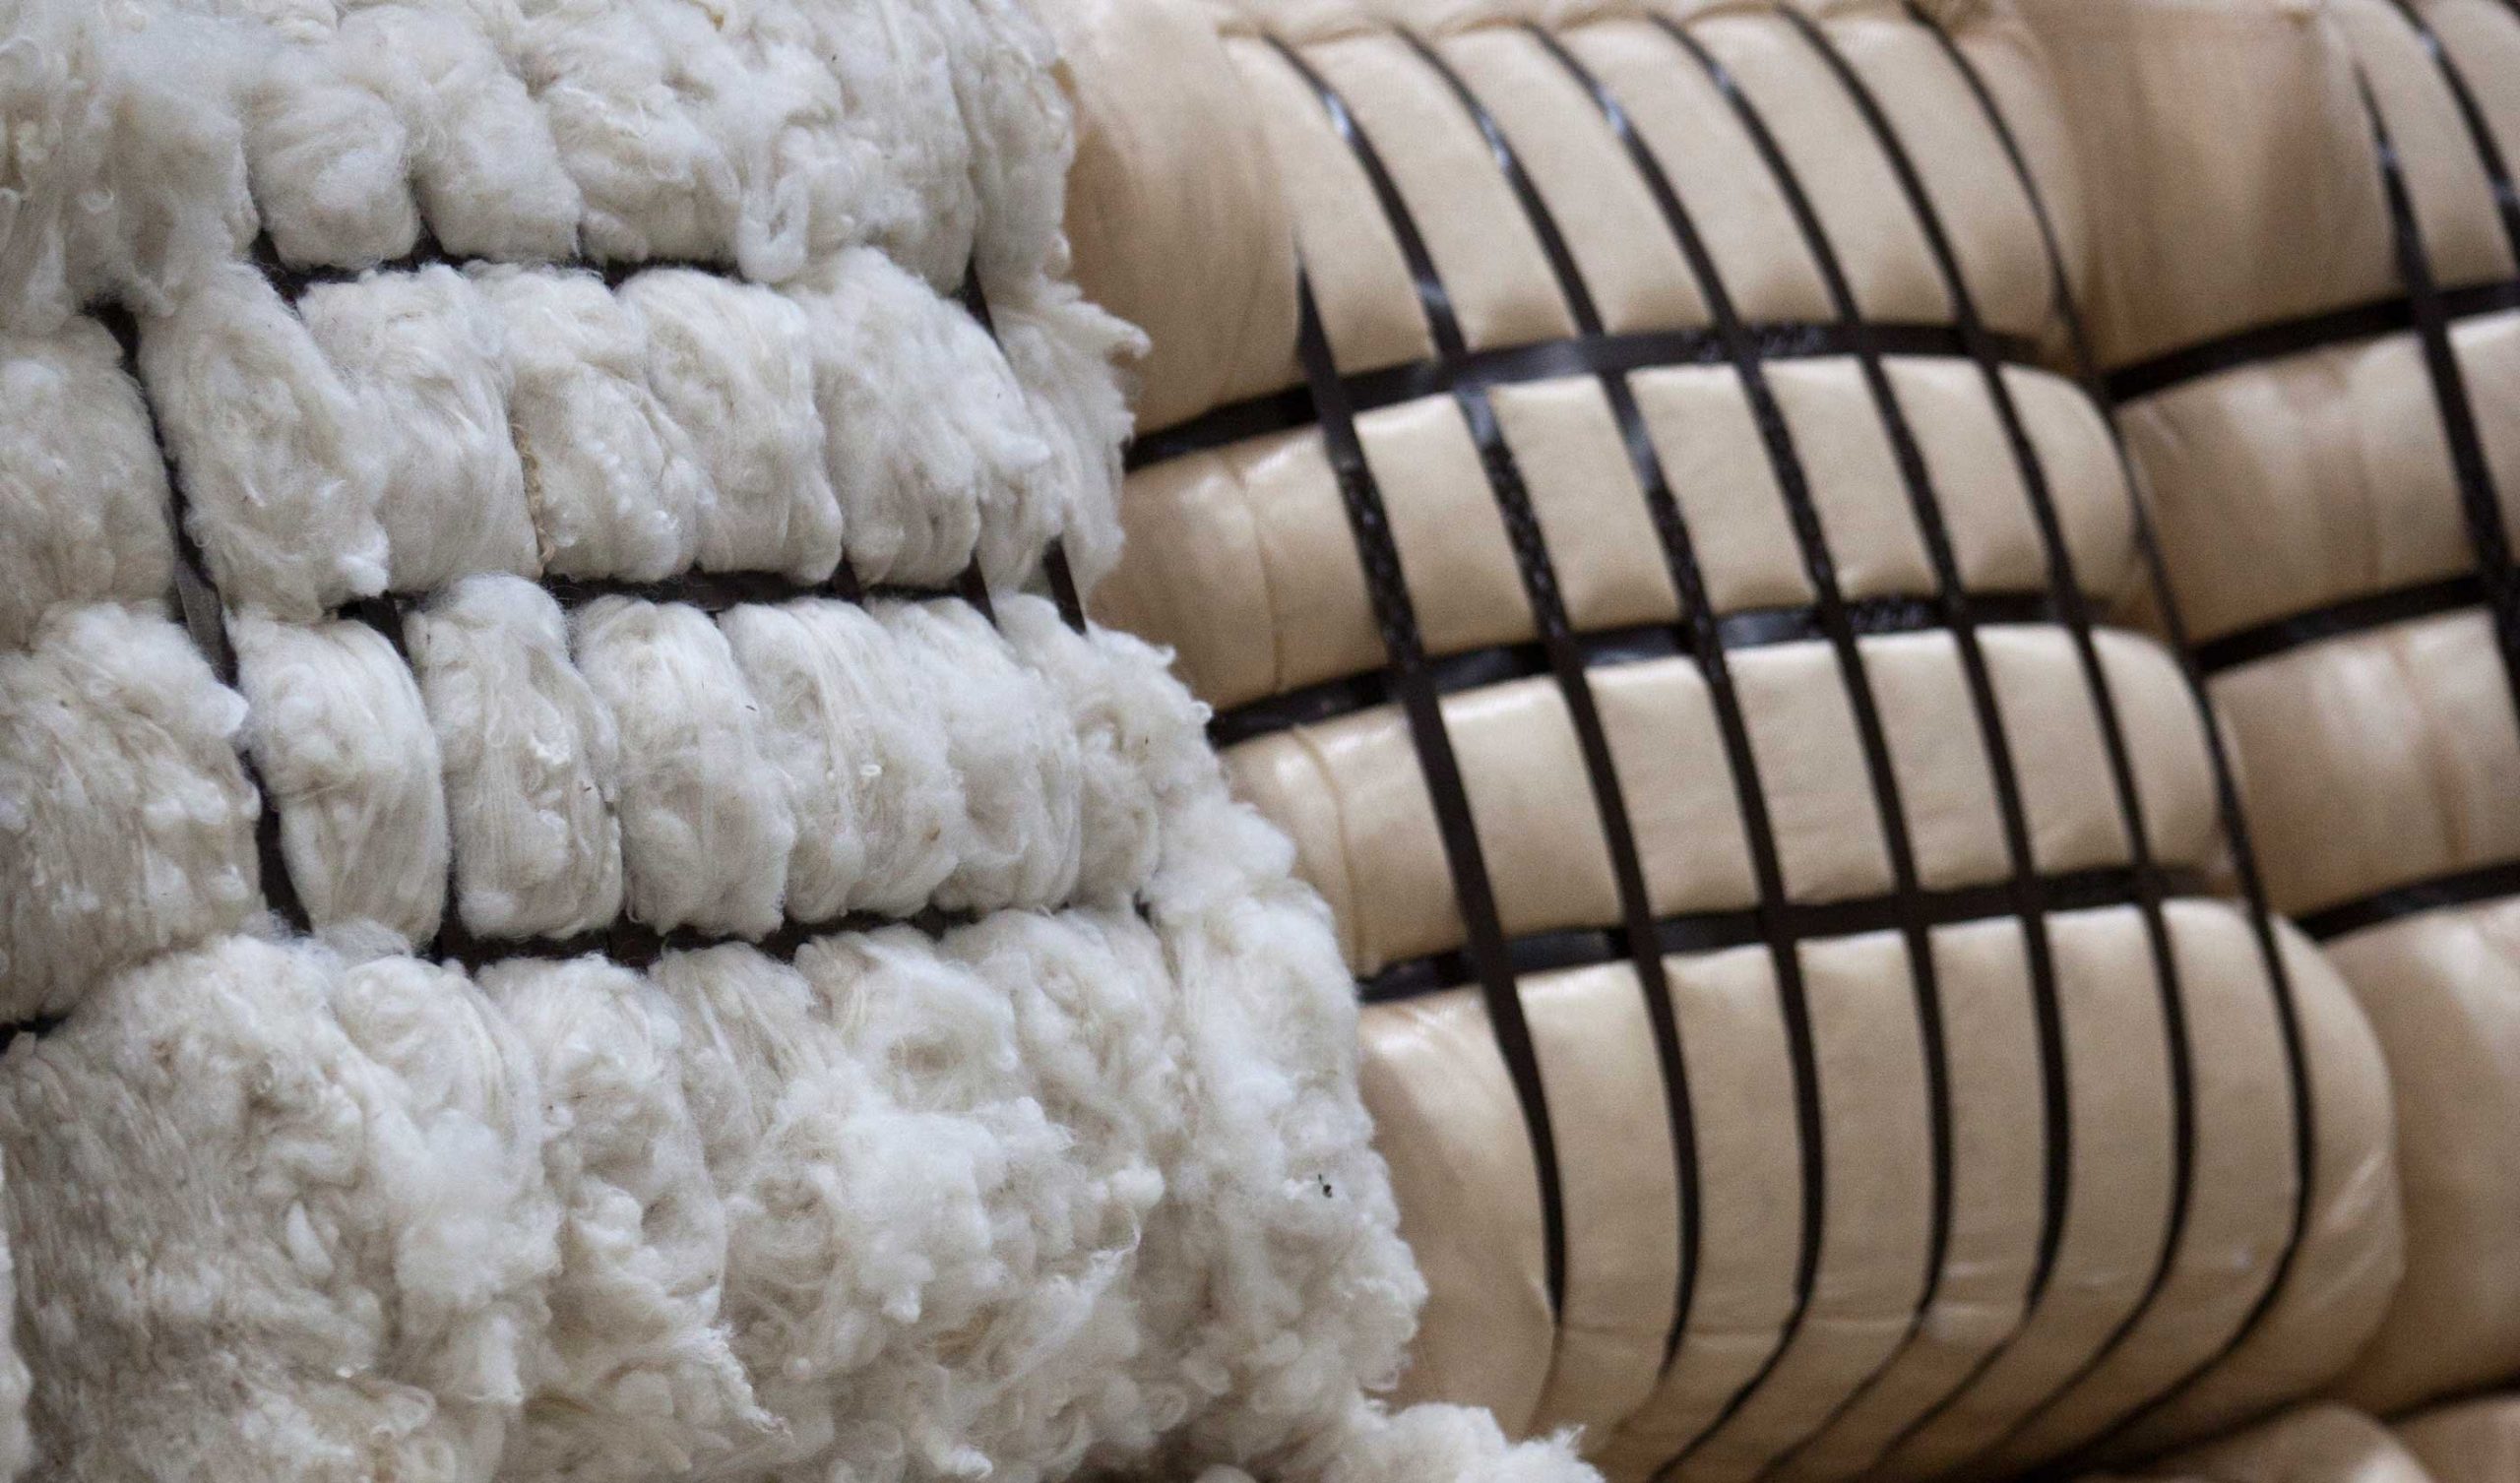 NZ Government releases plan to revitalise wool sector